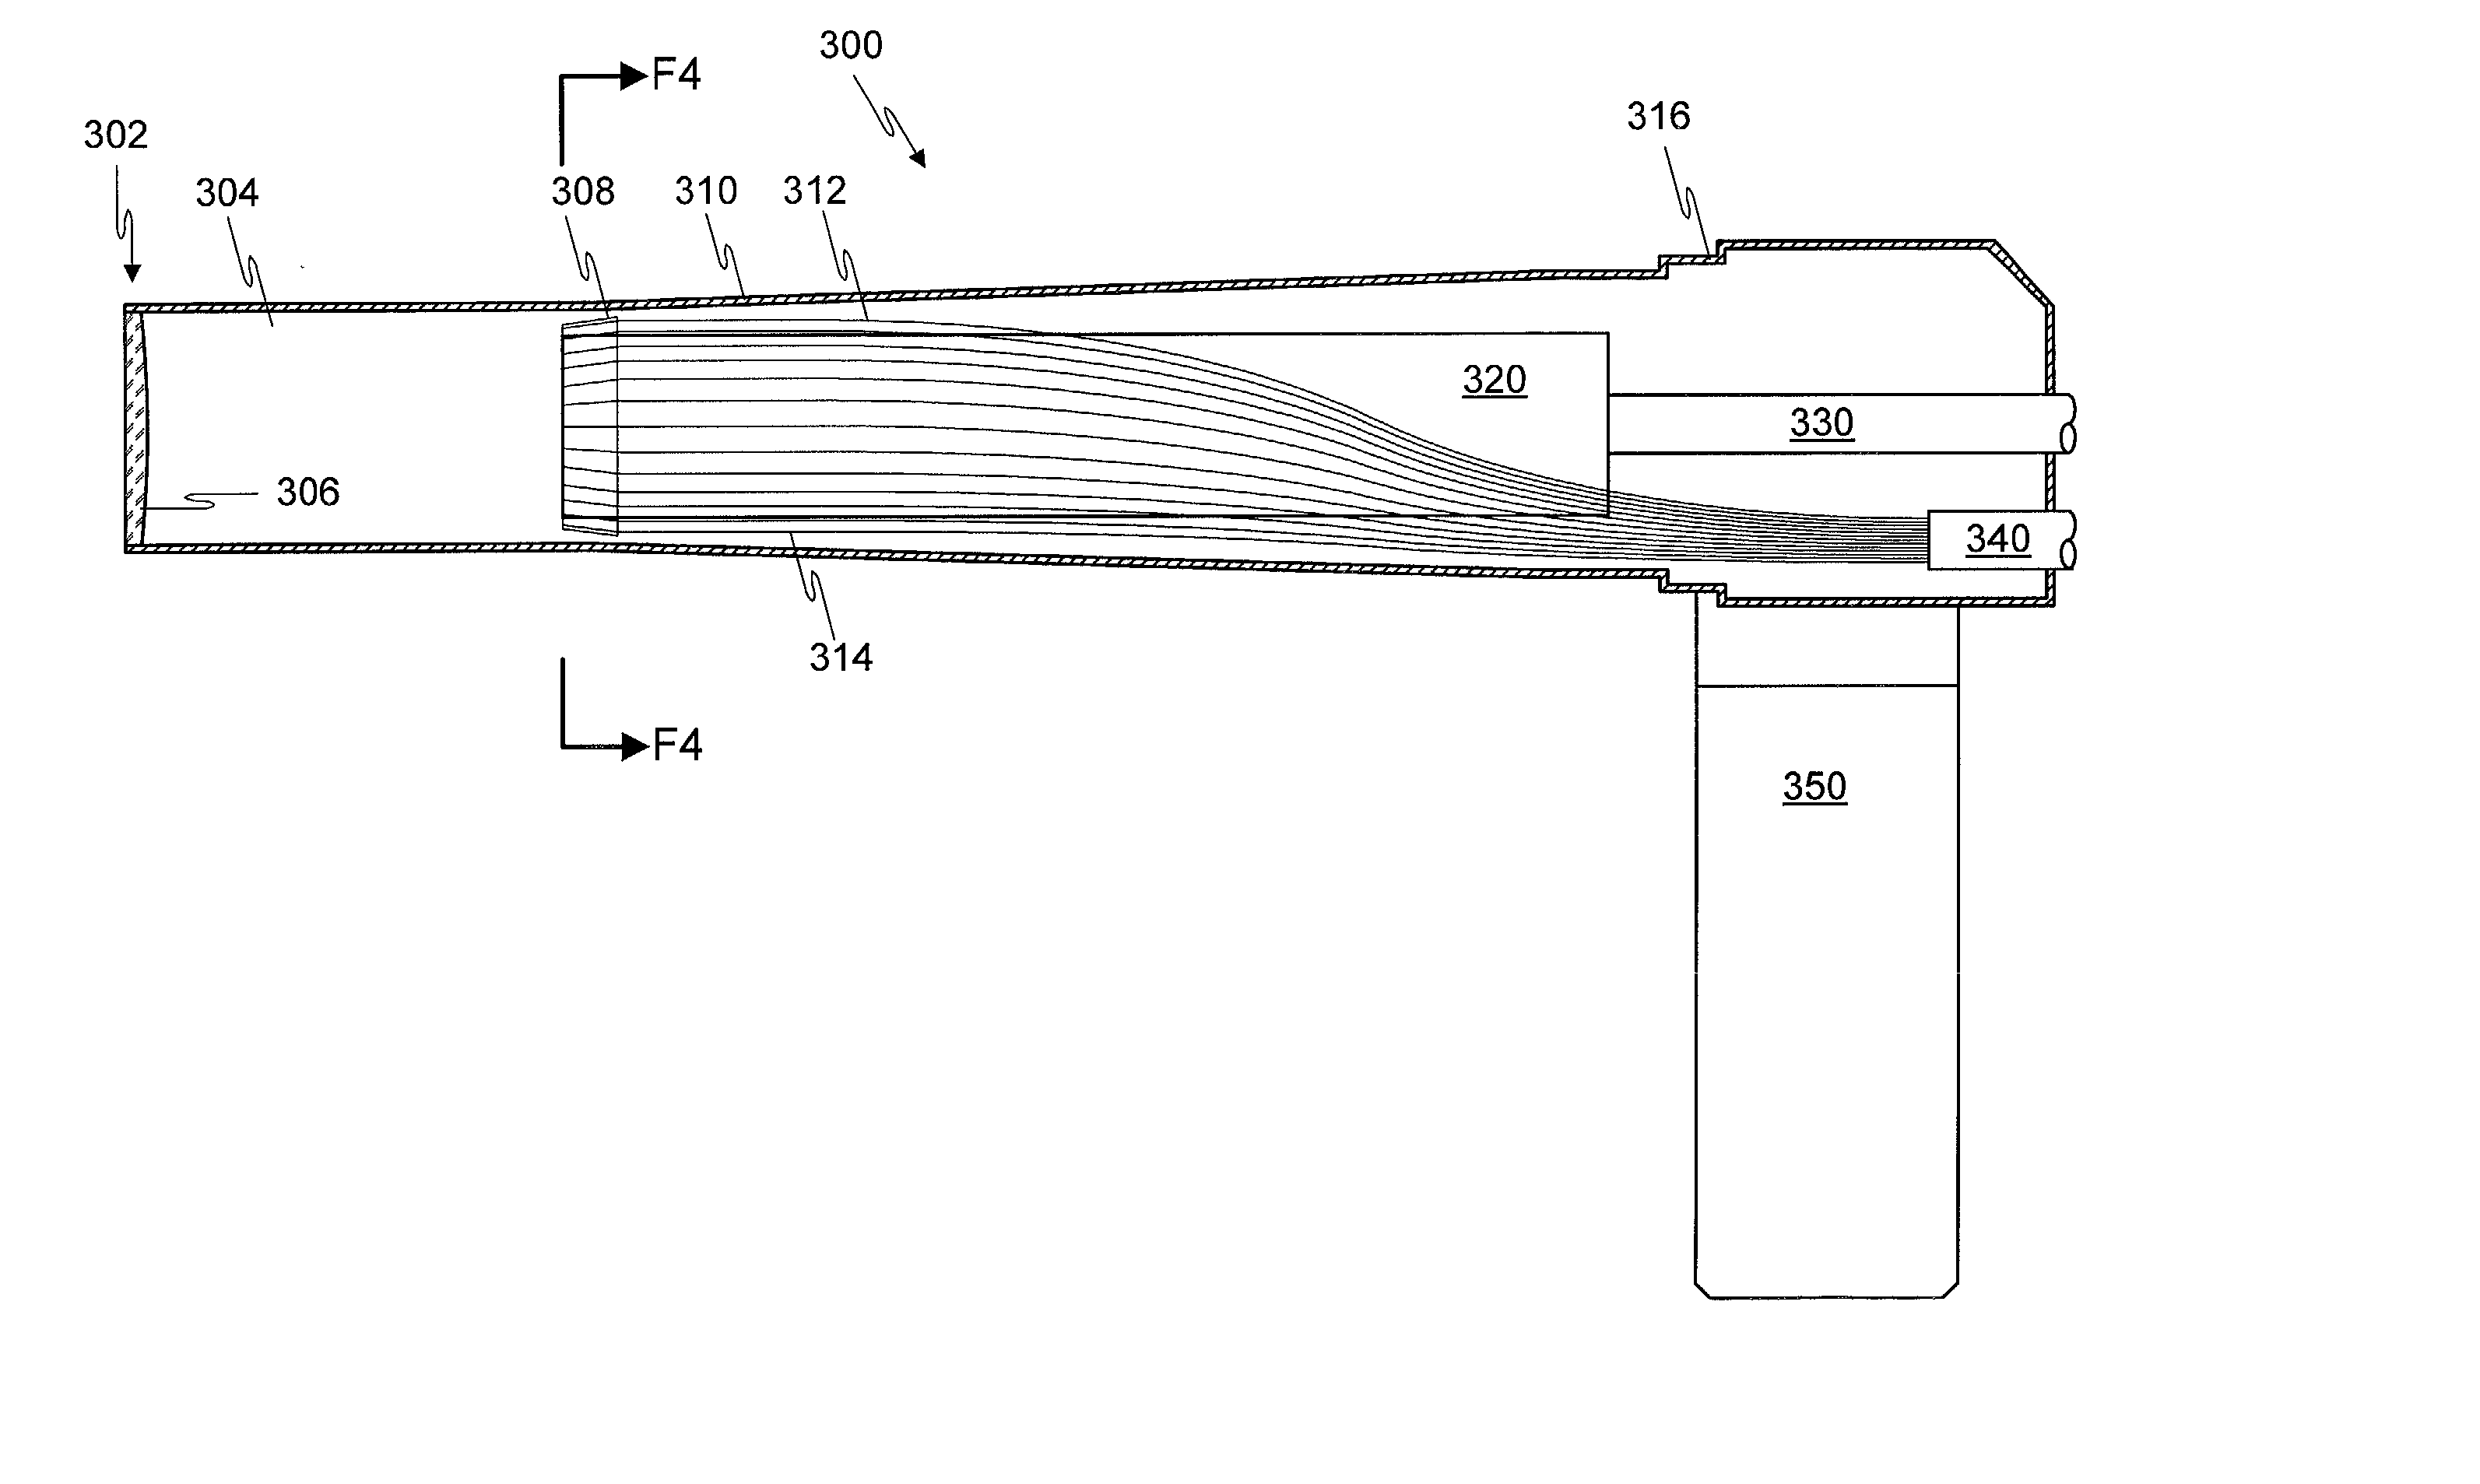 Optical probe having and methods for difuse and uniform light irradiation